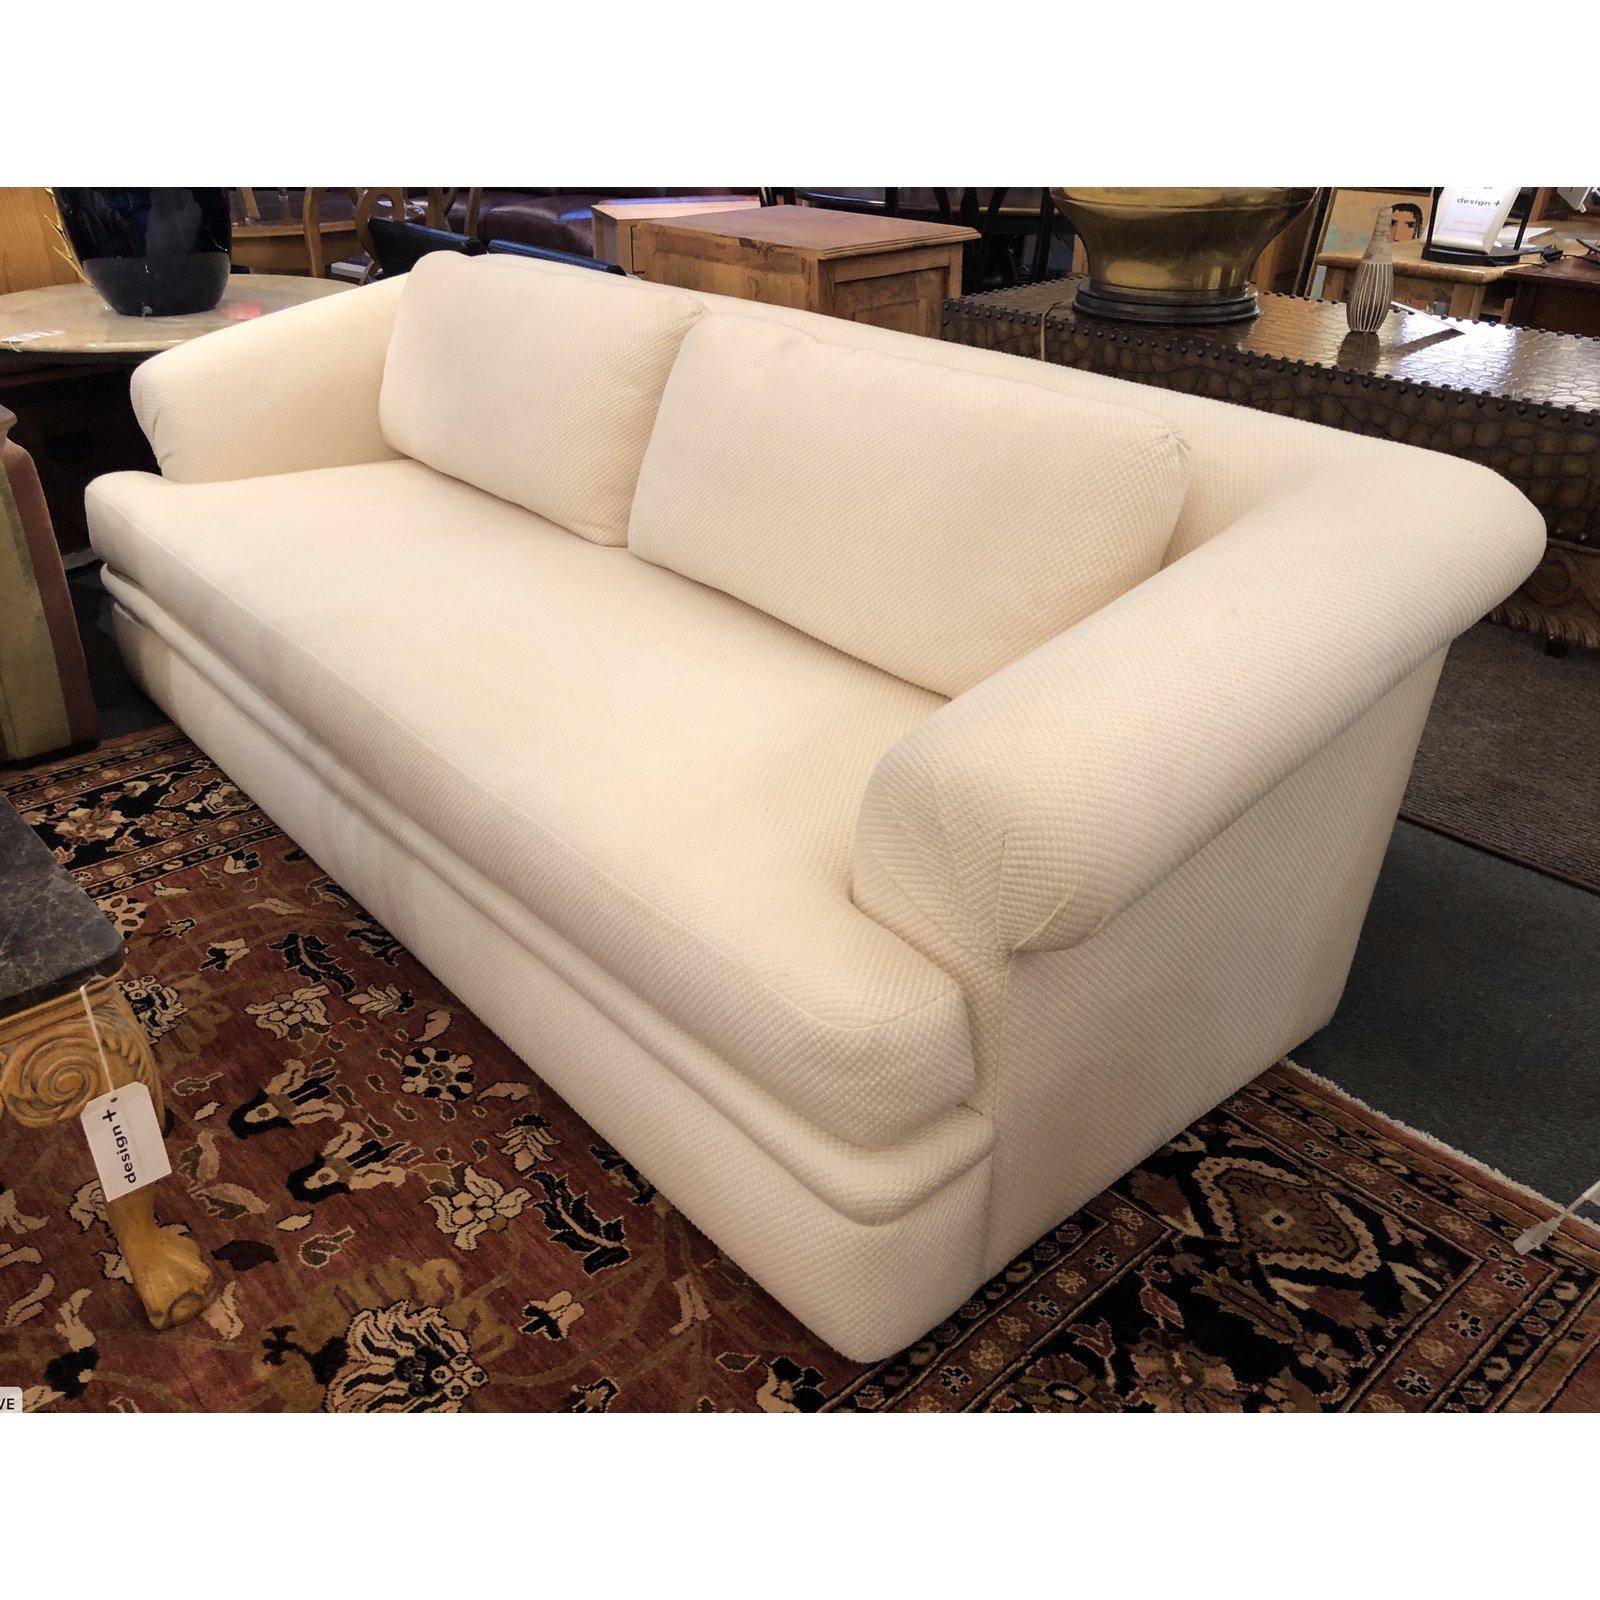 A. Rudin sofa. The sofa has beautifully rolled arms, a bench seat cushion and two back cushions. It is upholstered in an off-white waffle fabric. The sofa has a nice deep seat which makes it extremely comfortable. Seat height: 18 inches.